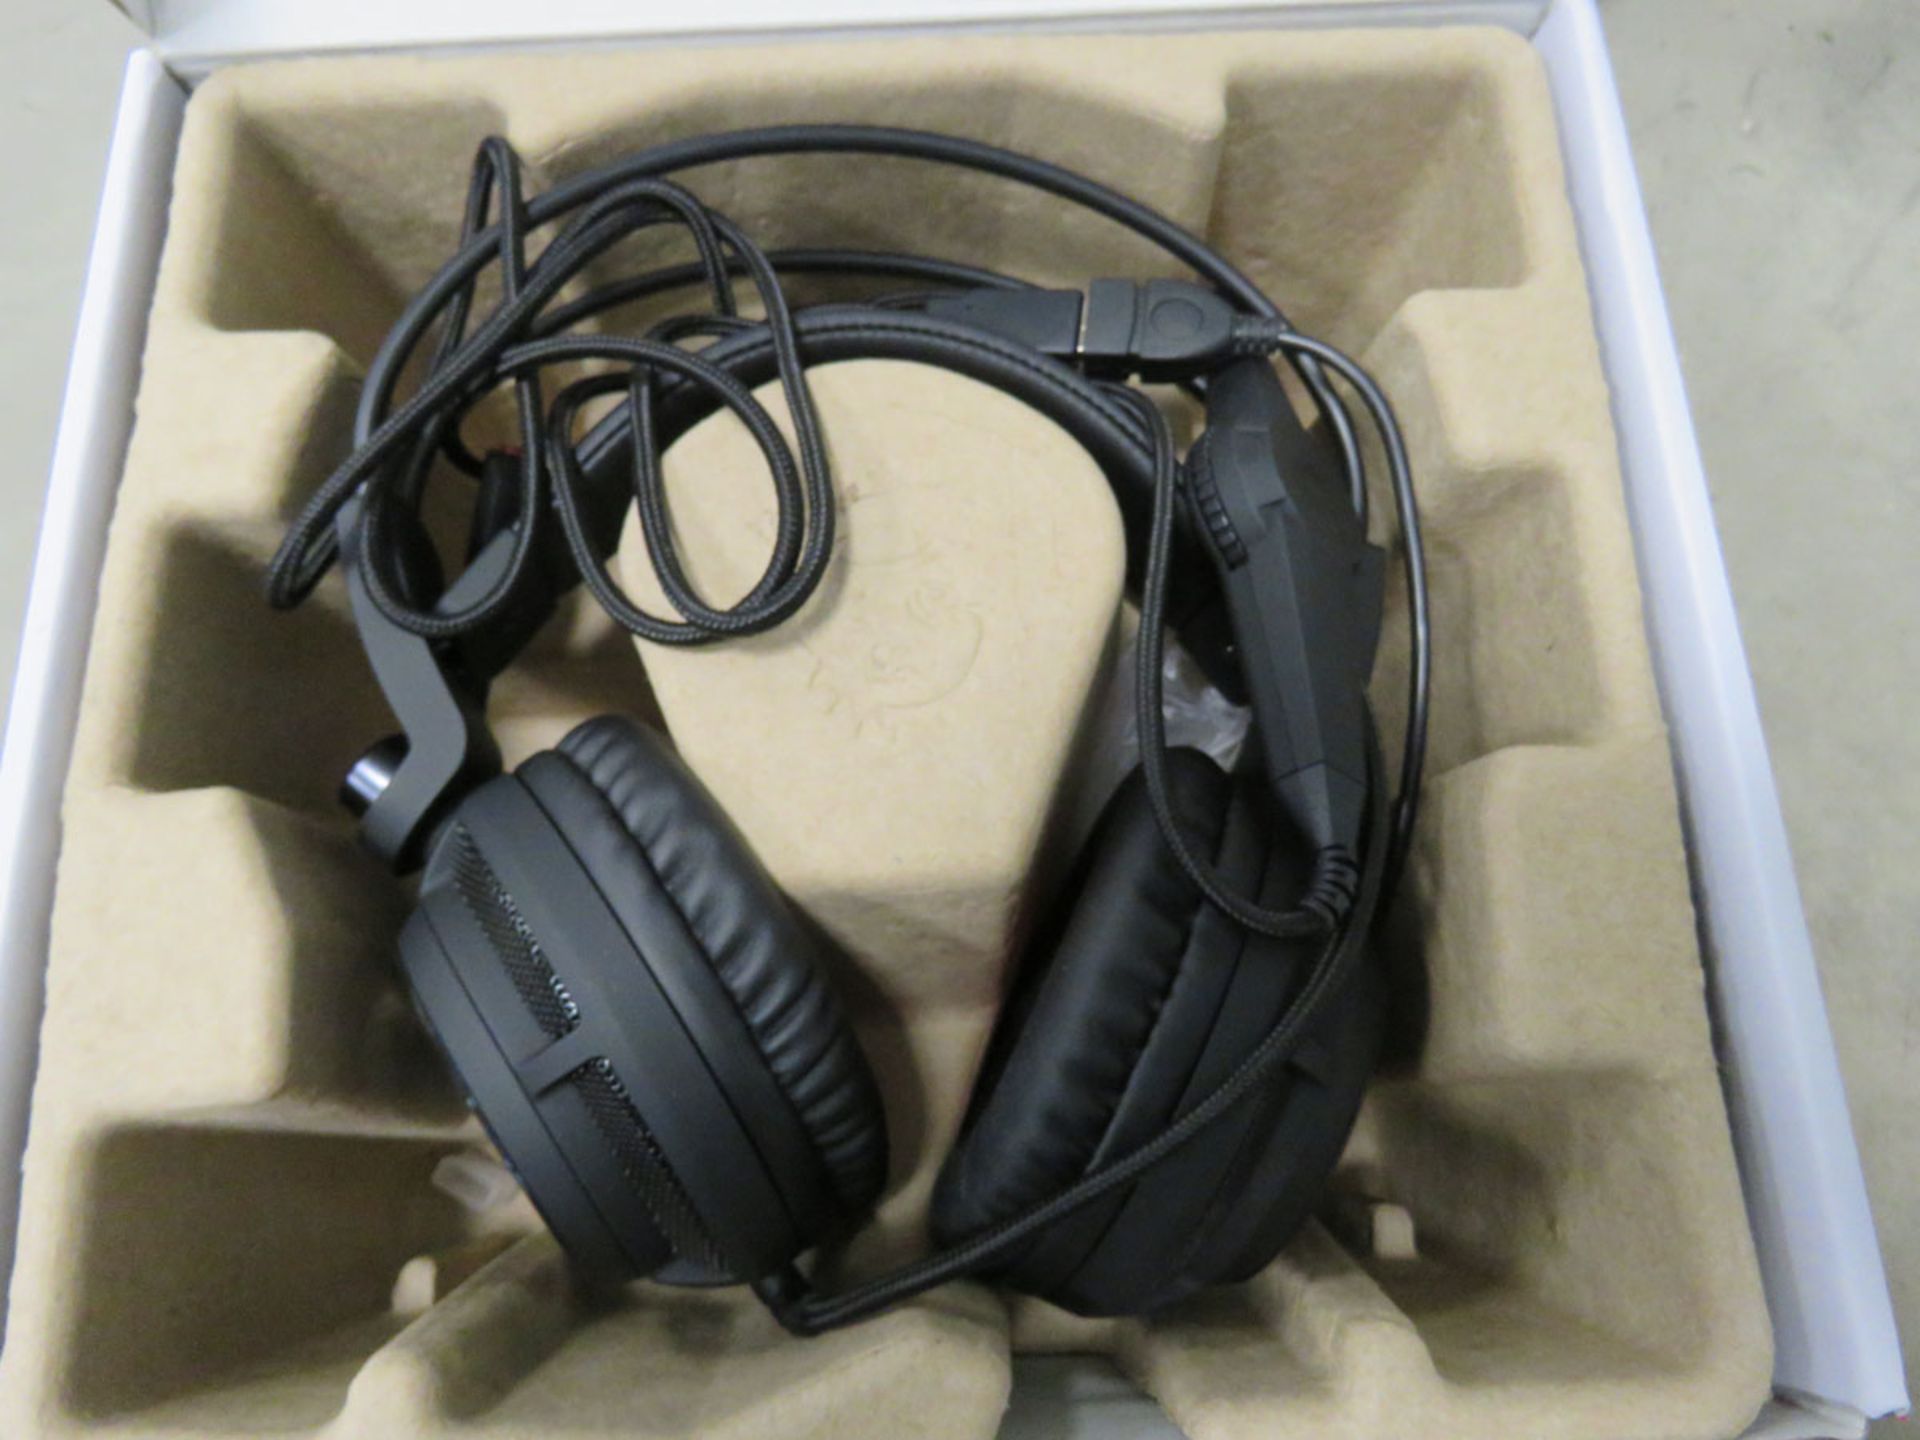 MSI DSI502 gaming headset for PC with box - Image 2 of 2